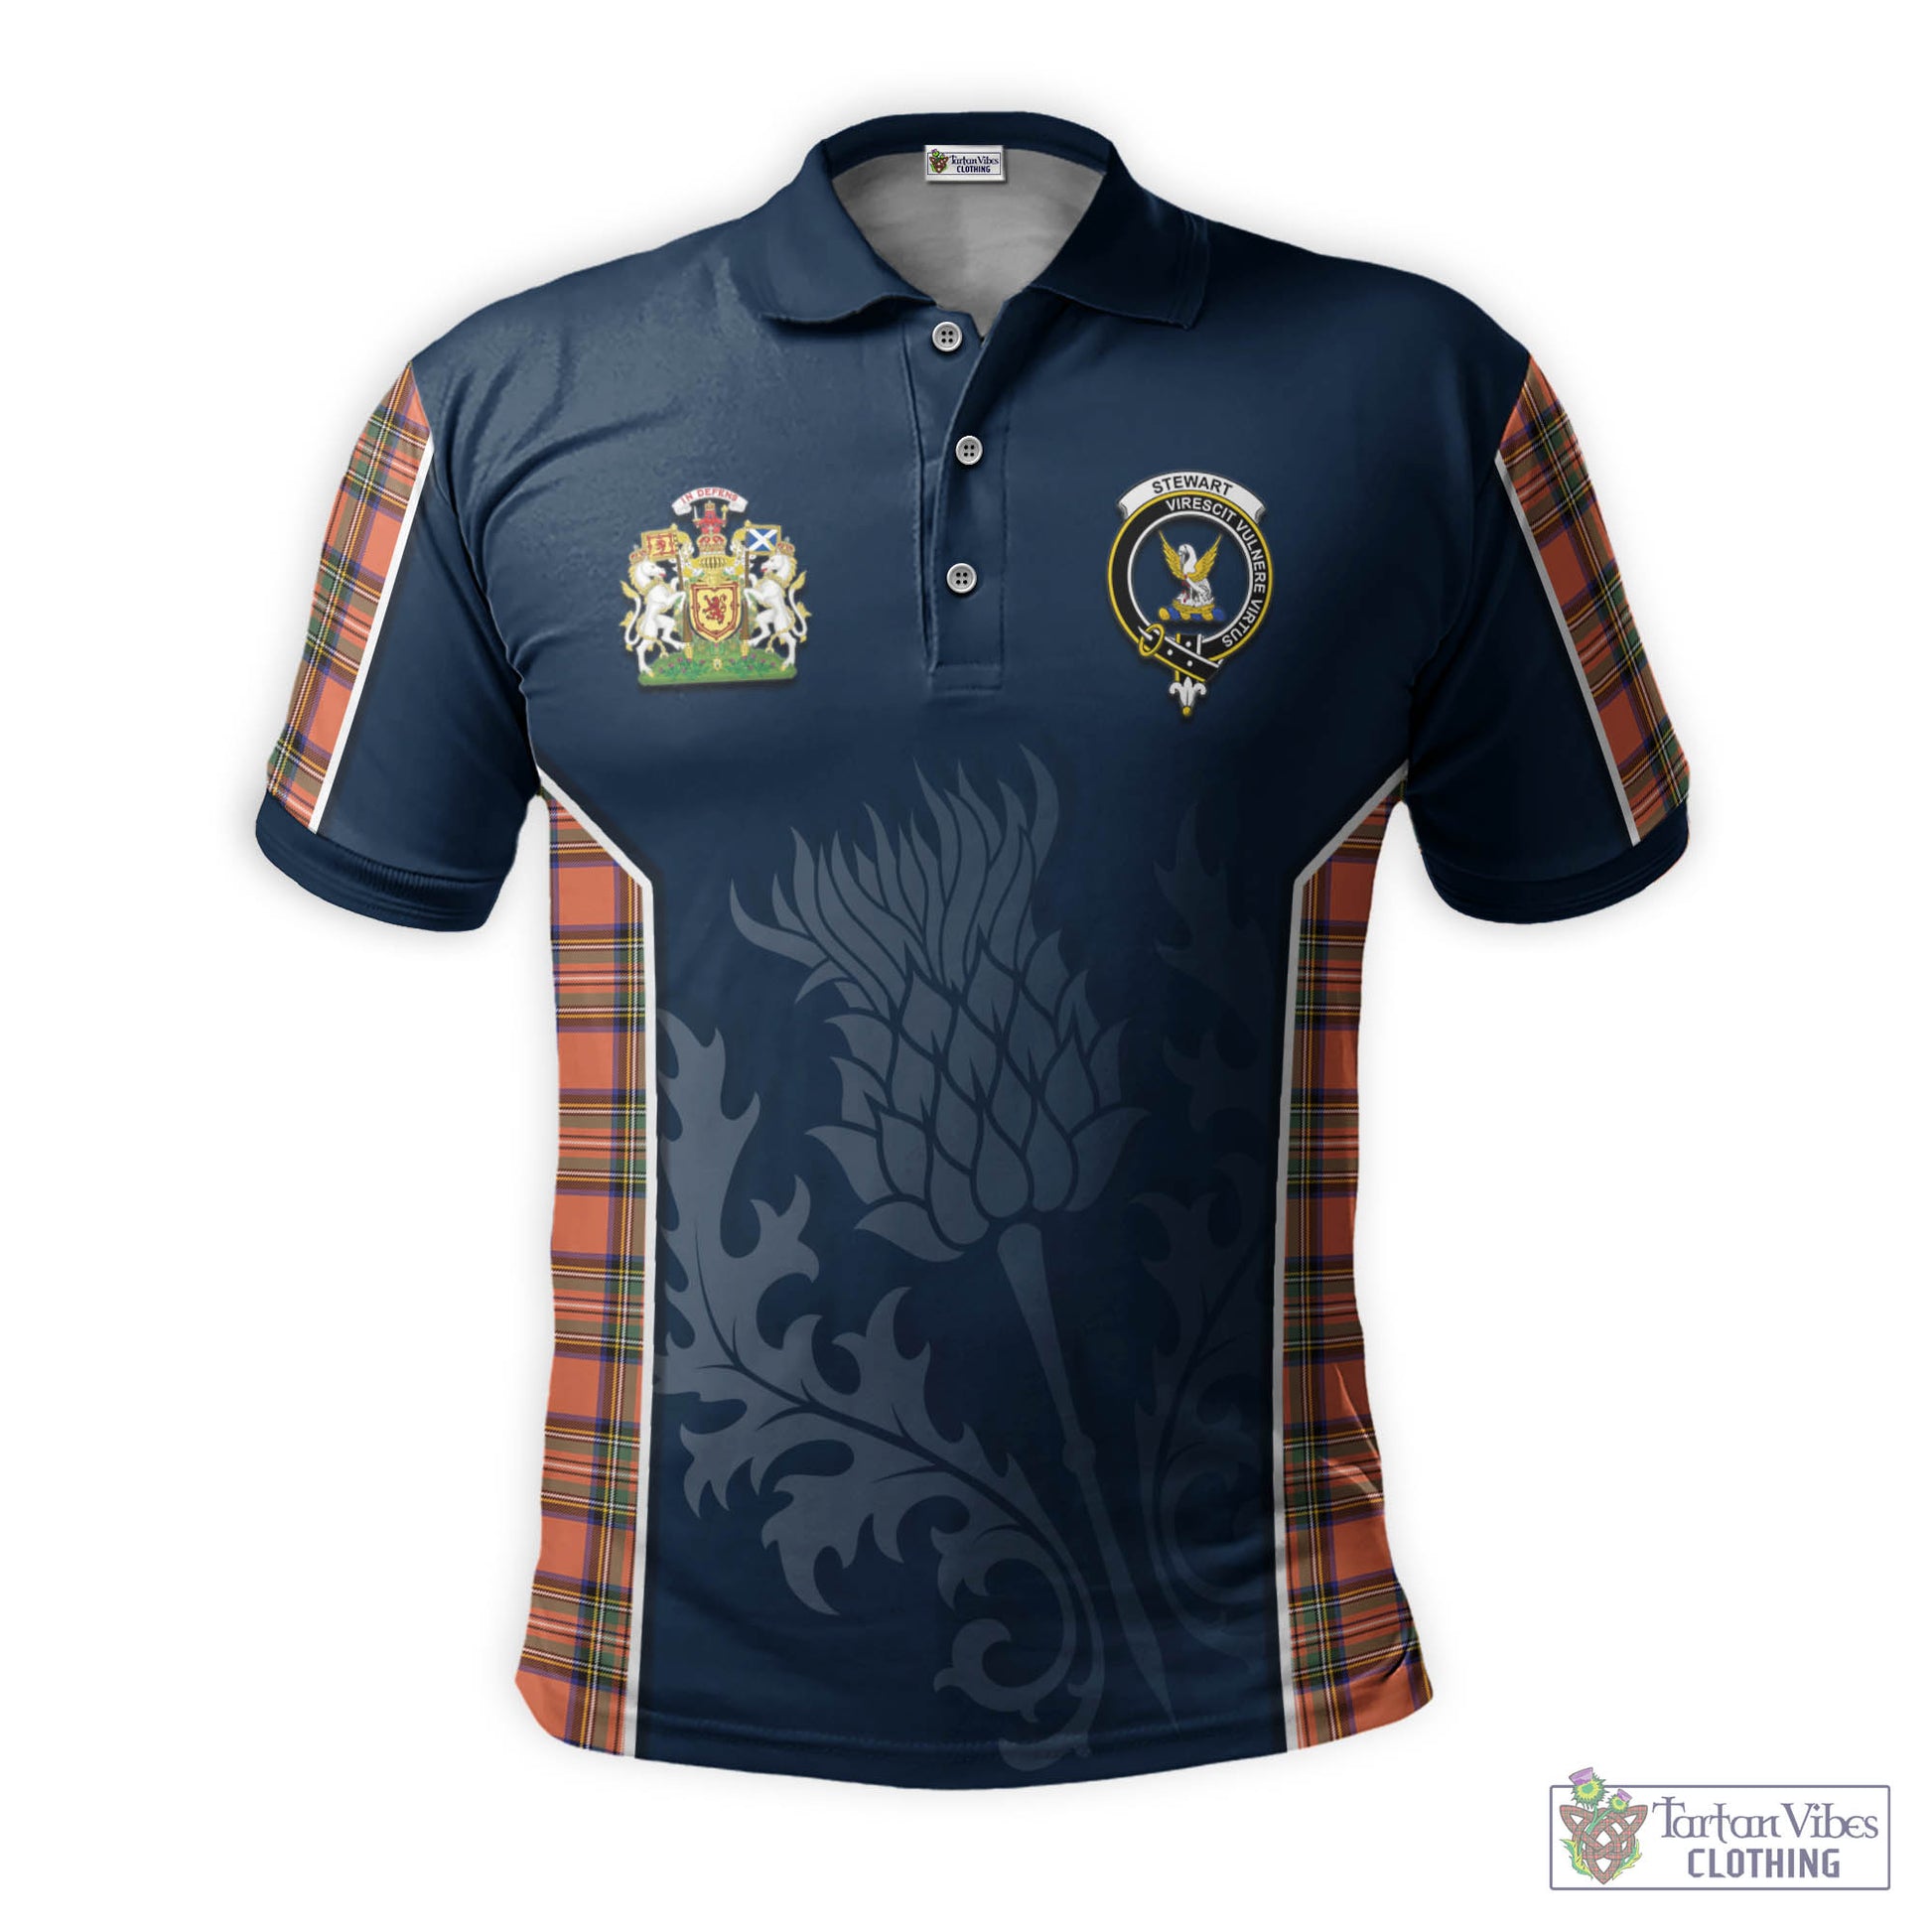 Tartan Vibes Clothing Stewart Royal Ancient Tartan Men's Polo Shirt with Family Crest and Scottish Thistle Vibes Sport Style